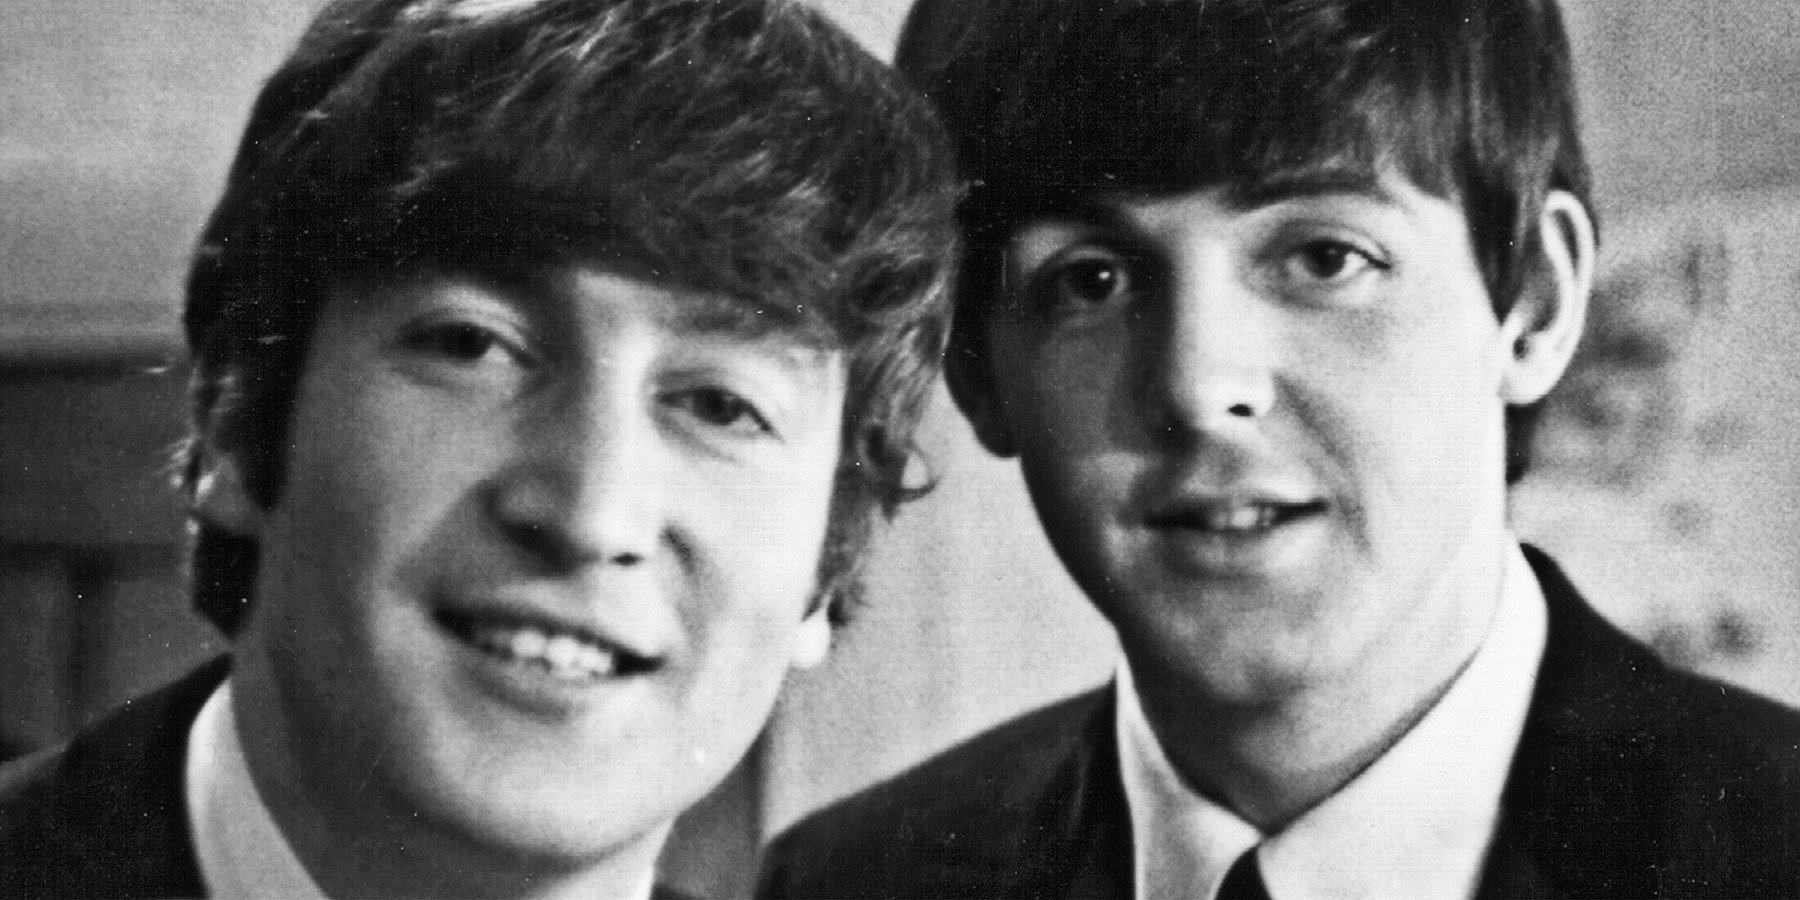 John Lennon and Paul McCartney from The Beatles posed backstage at the Finsbury Park Astoria, London during the band's Christmas Show residency on 30th December 1963.